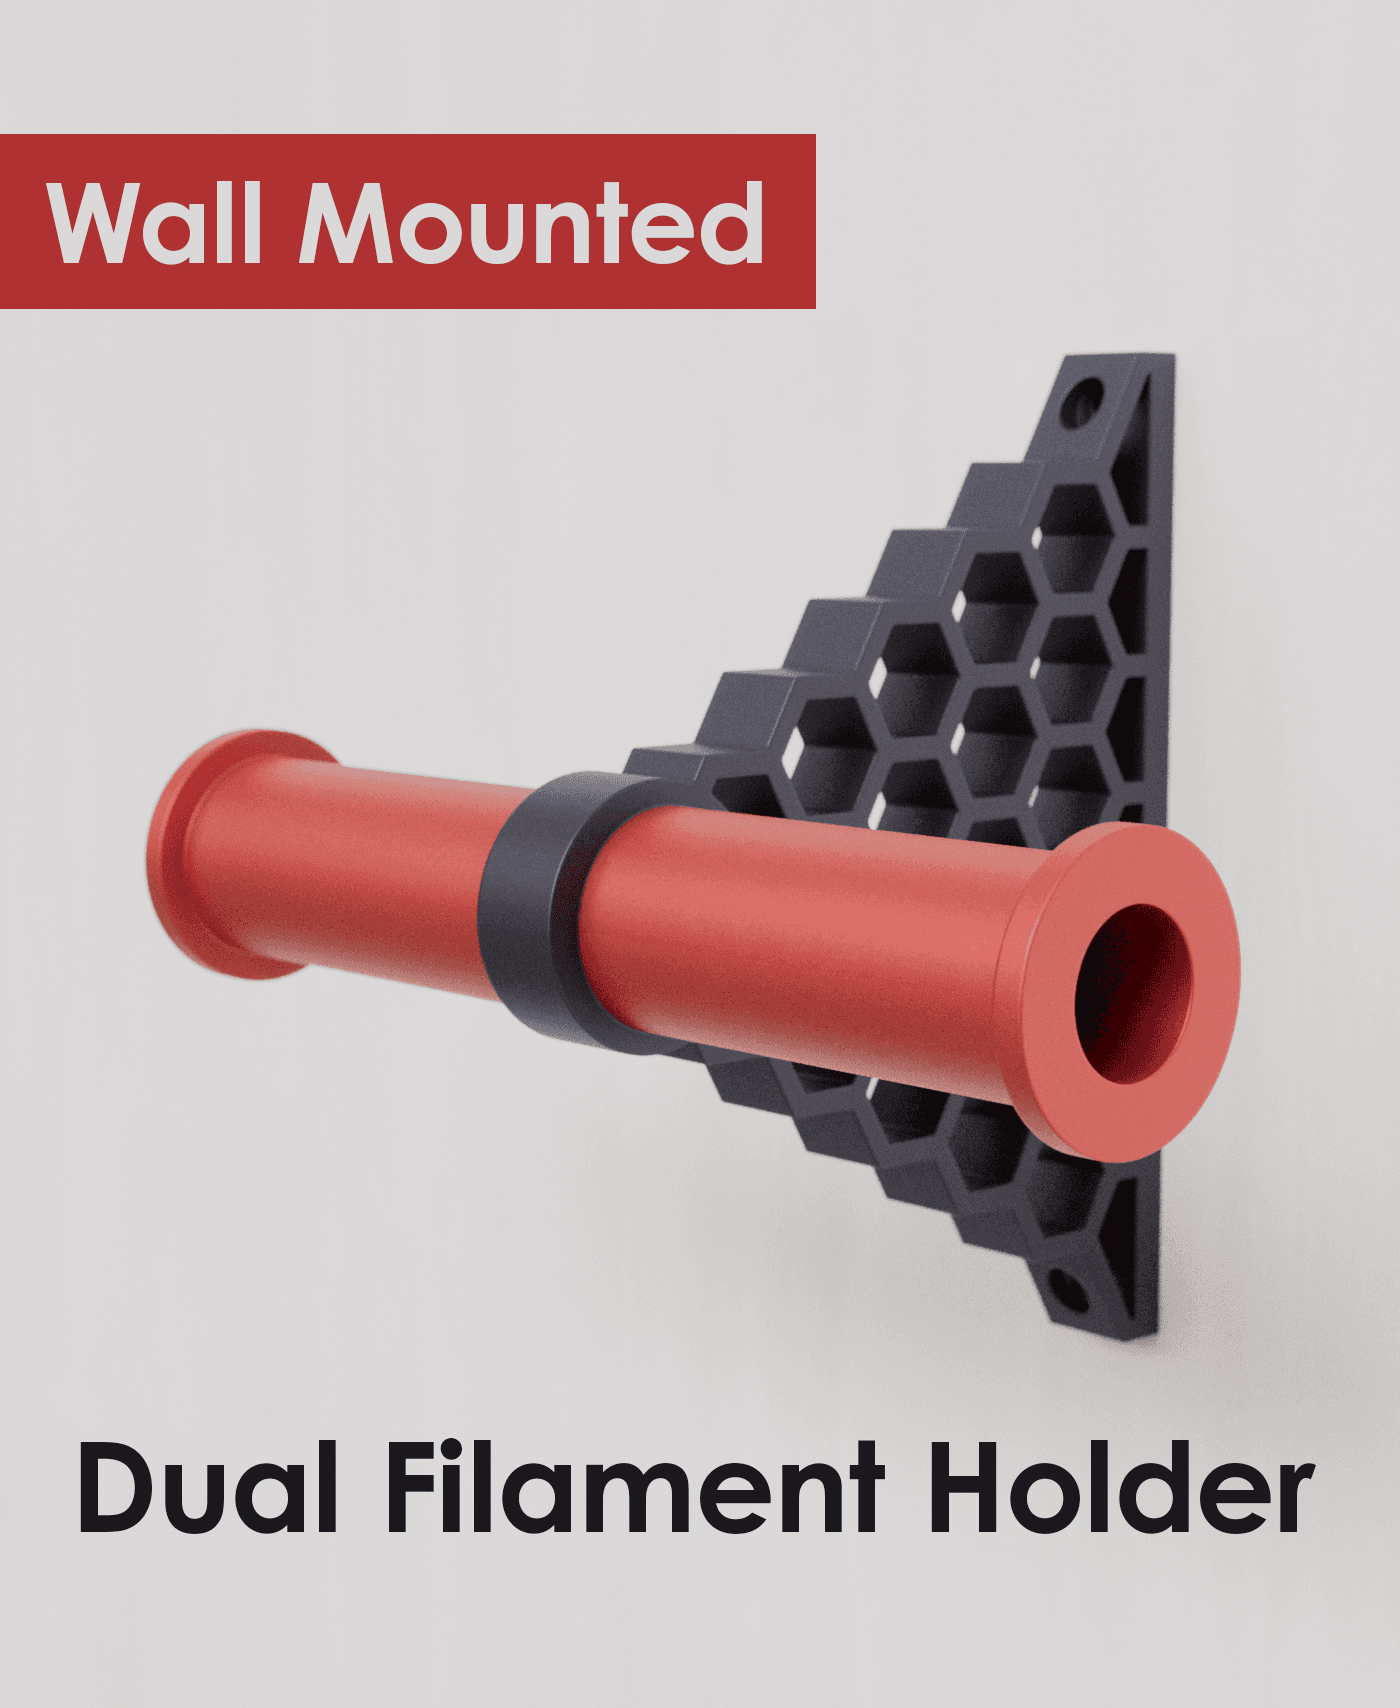 Wall Mounted Dual Filament Holder 3d model